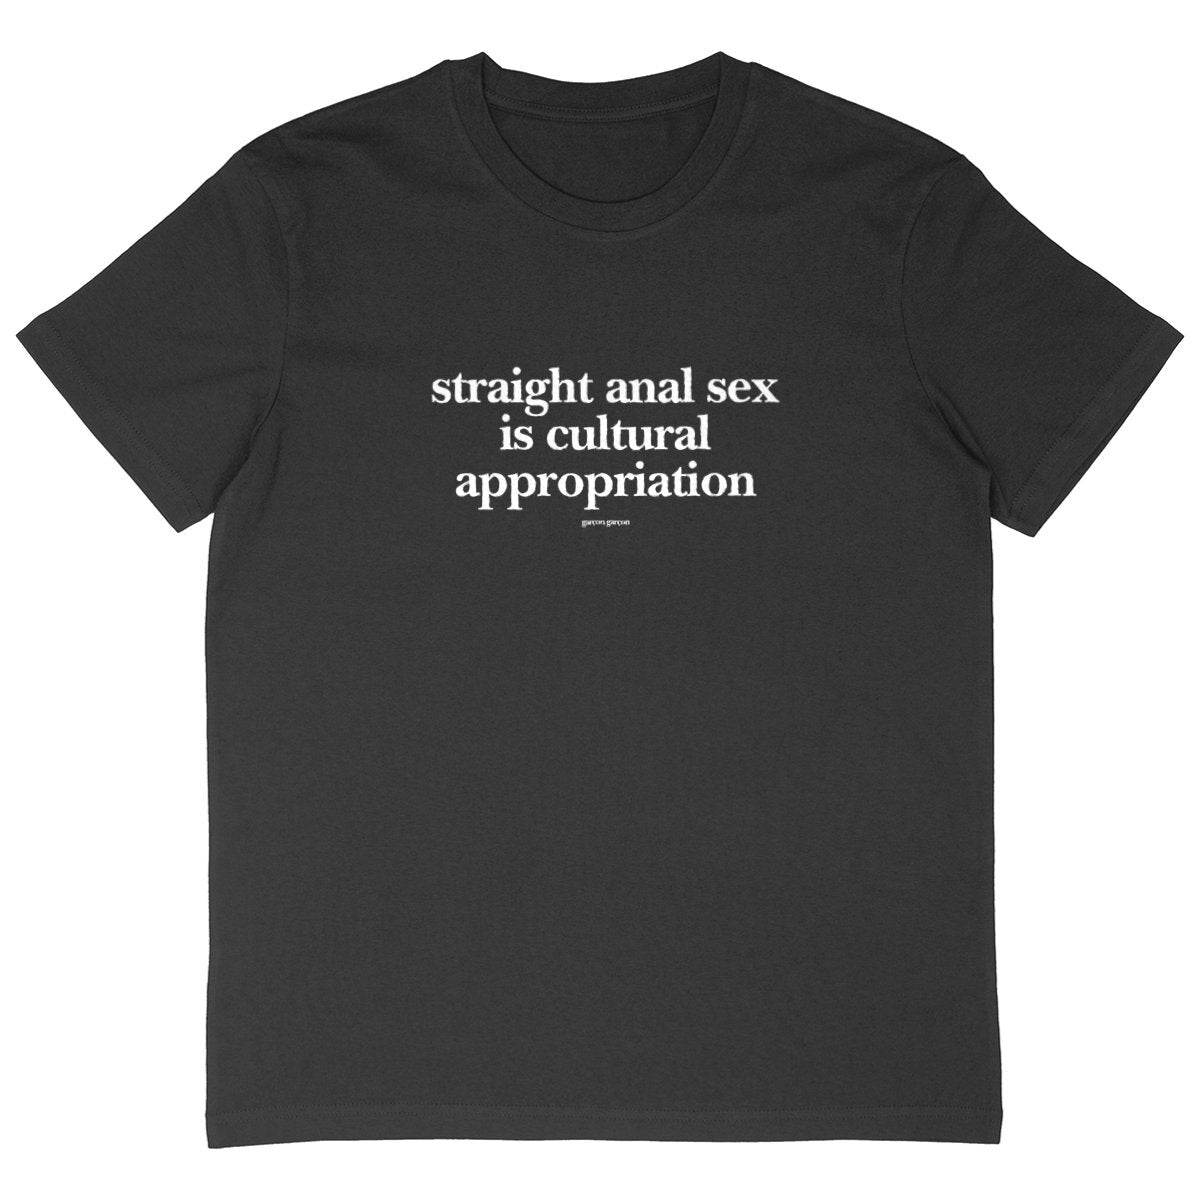 straight anal sex tee oversized. garçon garçon tee oversize BLACK. Dive into the essence of Parisian cool with this oversized tee. The subtle 'garçon garçon' signature whispers a chic narrative, offering a slice of the city's famed elegance. Perfect for those who speak style with simplicity.